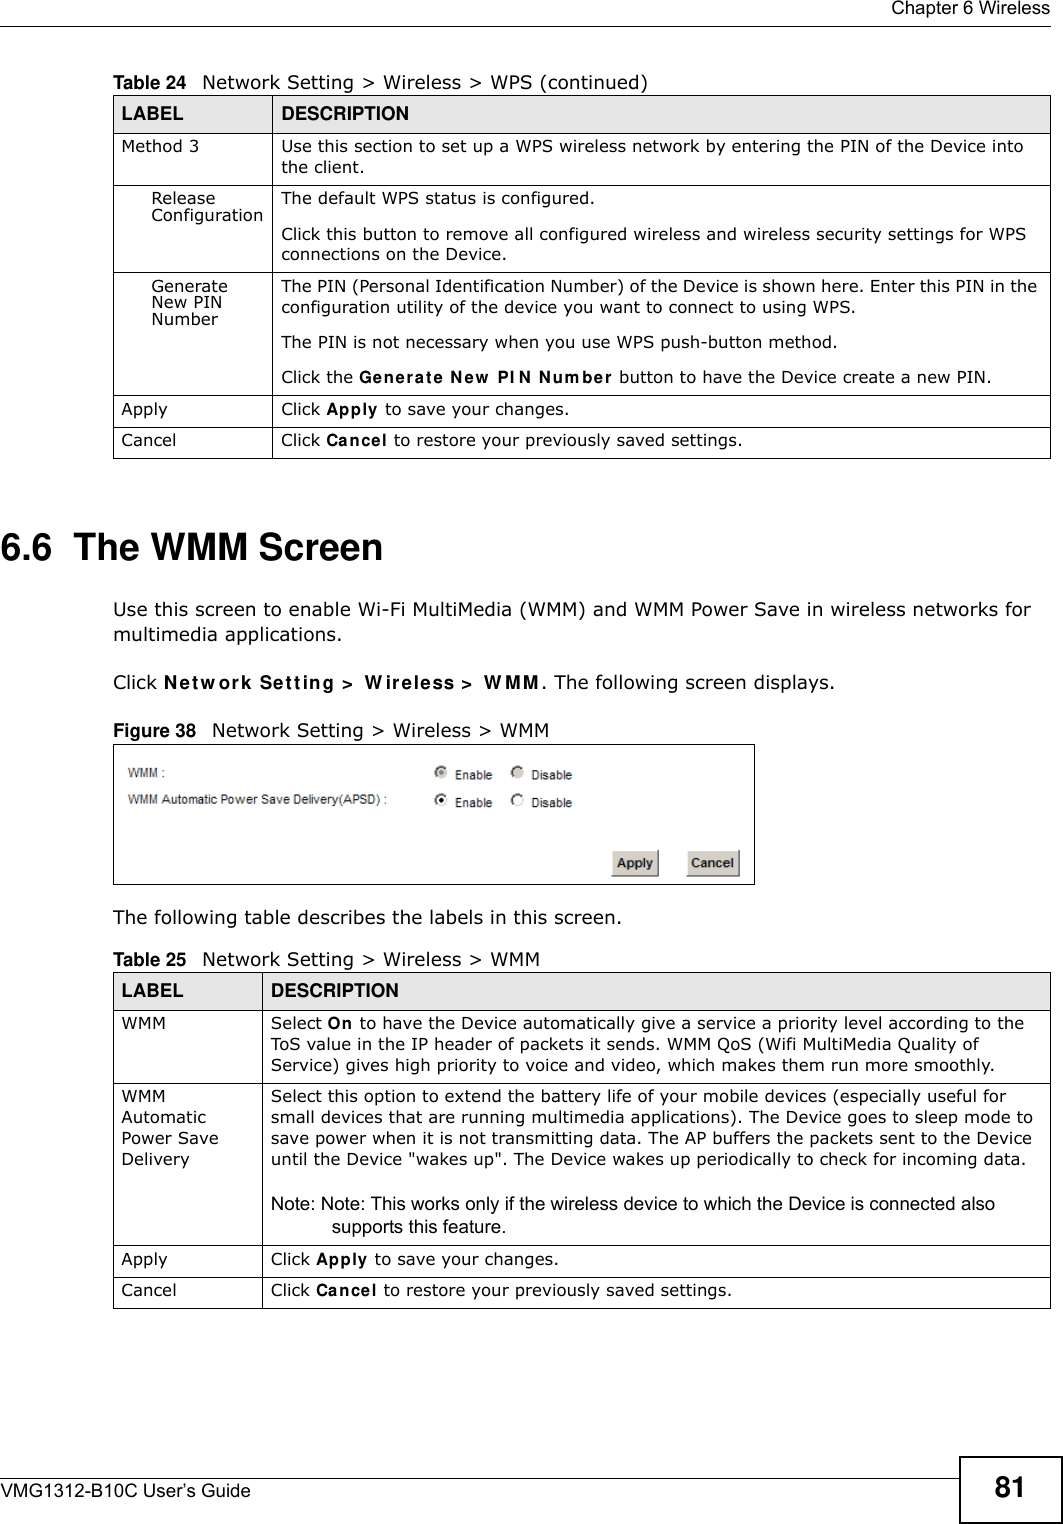  Chapter 6 WirelessVMG1312-B10C User’s Guide 816.6  The WMM ScreenUse this screen to enable Wi-Fi MultiMedia (WMM) and WMM Power Save in wireless networks for multimedia applications.Click N et w or k Set t in g &gt;  W ire less &gt;  W MM . The following screen displays.Figure 38   Network Setting &gt; Wireless &gt; WMMThe following table describes the labels in this screen.Method 3 Use this section to set up a WPS wireless network by entering the PIN of the Device into the client.Release Configuration The default WPS status is configured.Click this button to remove all configured wireless and wireless security settings for WPS connections on the Device.Generate New PIN NumberThe PIN (Personal Identification Number) of the Device is shown here. Enter this PIN in the configuration utility of the device you want to connect to using WPS.The PIN is not necessary when you use WPS push-button method.Click the Gene r a t e  N e w  PI N  N um ber  button to have the Device create a new PIN. Apply Click Apply to save your changes.Cancel Click Ca nce l to restore your previously saved settings.Table 24   Network Setting &gt; Wireless &gt; WPS (continued)LABEL DESCRIPTIONTable 25   Network Setting &gt; Wireless &gt; WMMLABEL DESCRIPTIONWMM Select On to have the Device automatically give a service a priority level according to the ToS value in the IP header of packets it sends. WMM QoS (Wifi MultiMedia Quality of Service) gives high priority to voice and video, which makes them run more smoothly.WMM Automatic Power Save DeliverySelect this option to extend the battery life of your mobile devices (especially useful for small devices that are running multimedia applications). The Device goes to sleep mode to save power when it is not transmitting data. The AP buffers the packets sent to the Device until the Device &quot;wakes up&quot;. The Device wakes up periodically to check for incoming data.Note: Note: This works only if the wireless device to which the Device is connected also supports this feature.Apply Click Apply to save your changes.Cancel Click Cance l to restore your previously saved settings.